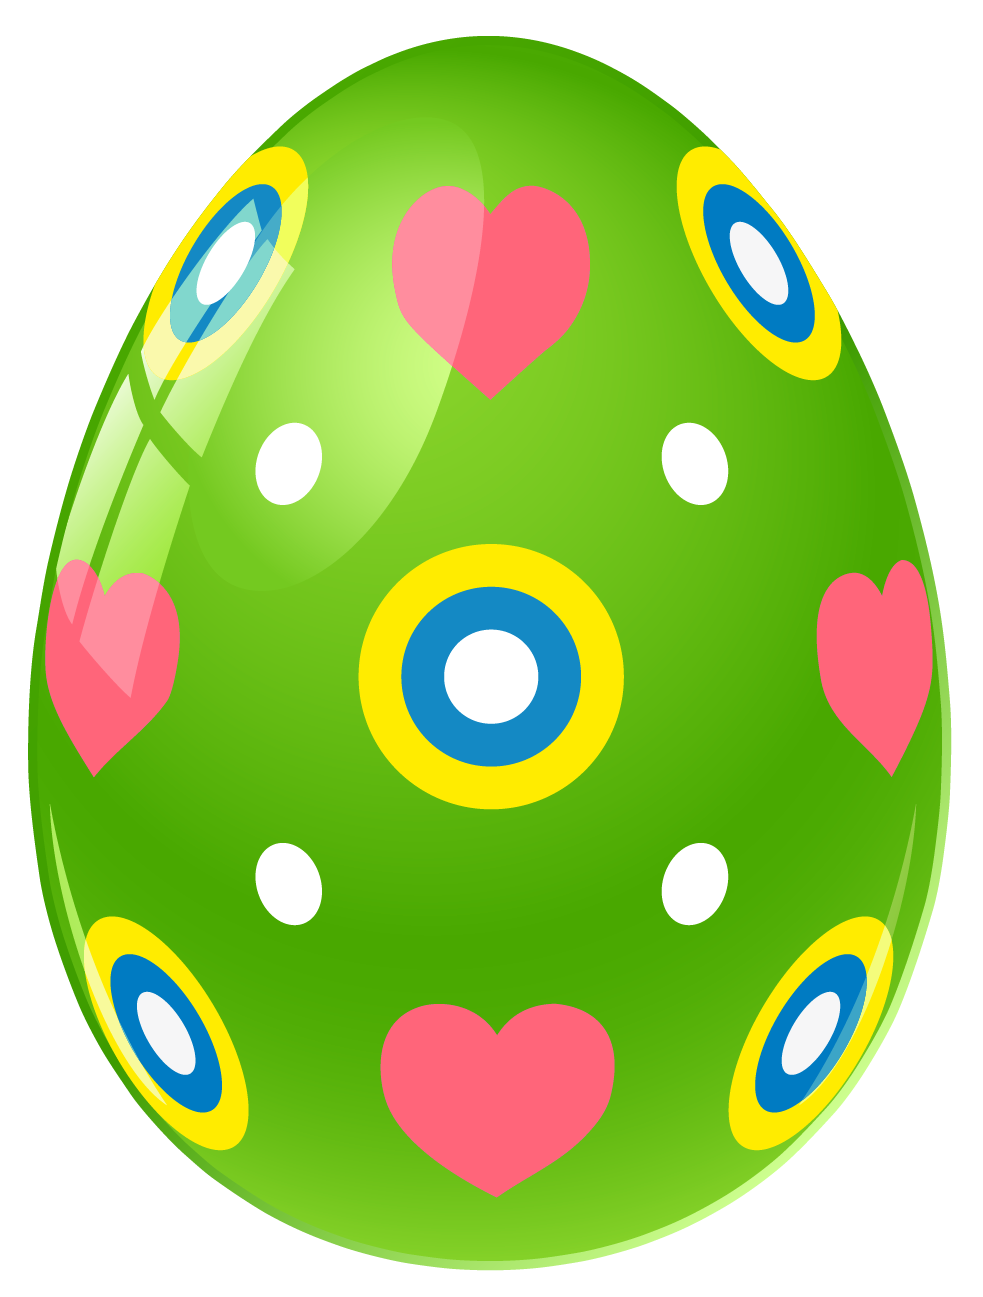 Green Easter Egg With Hearts .